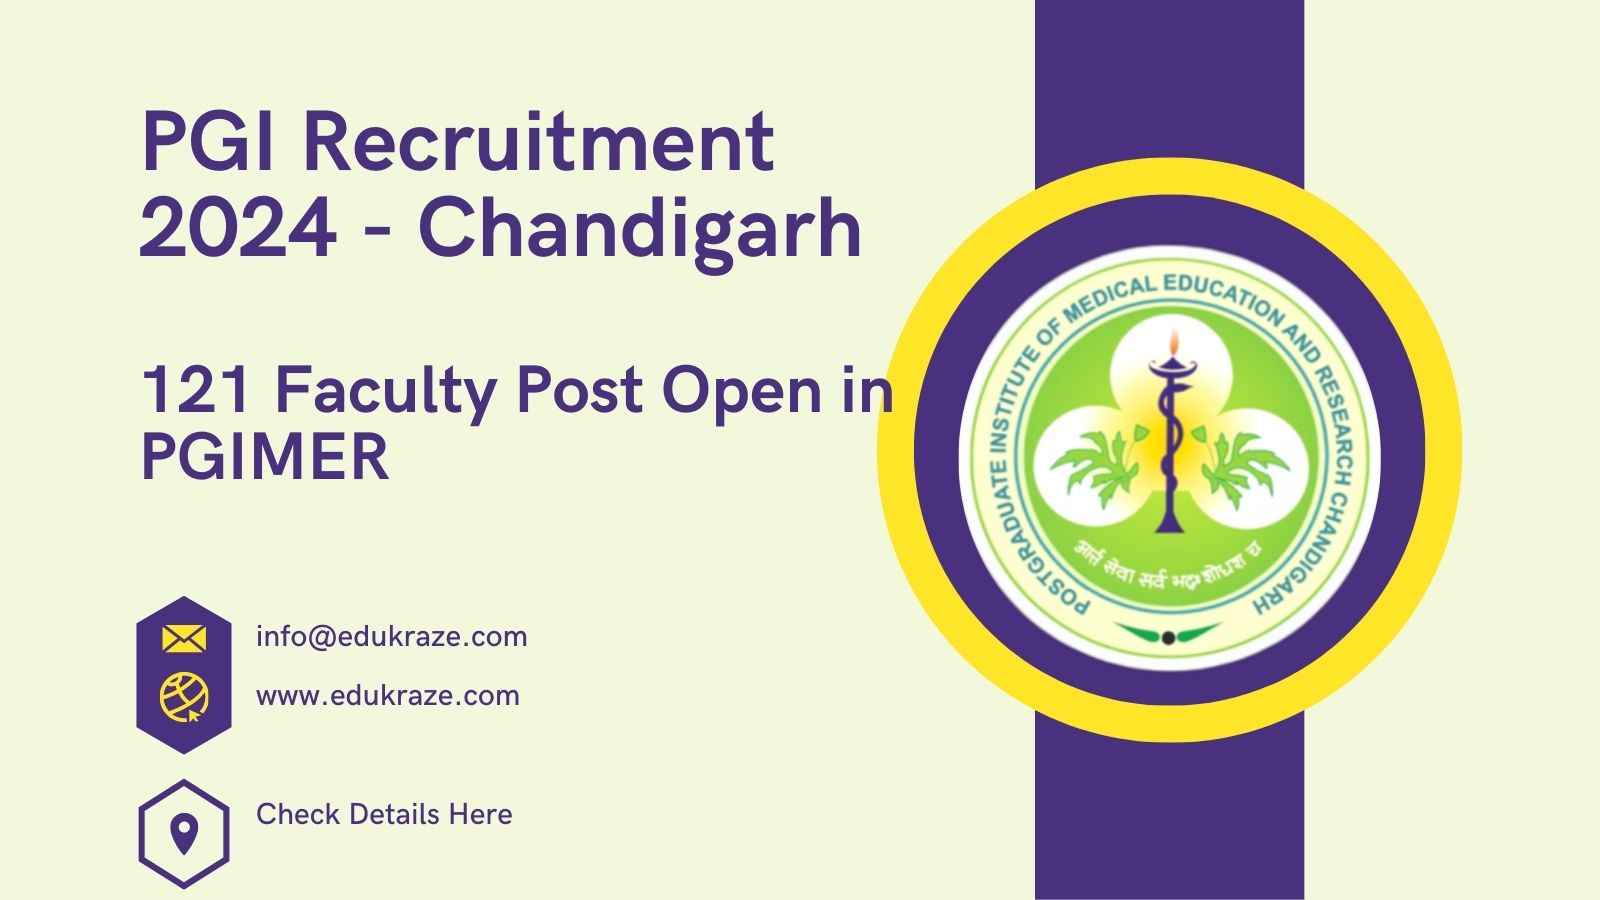 PGIMER Recruitment Out for 120+ Faculty Positions, Apply Now!